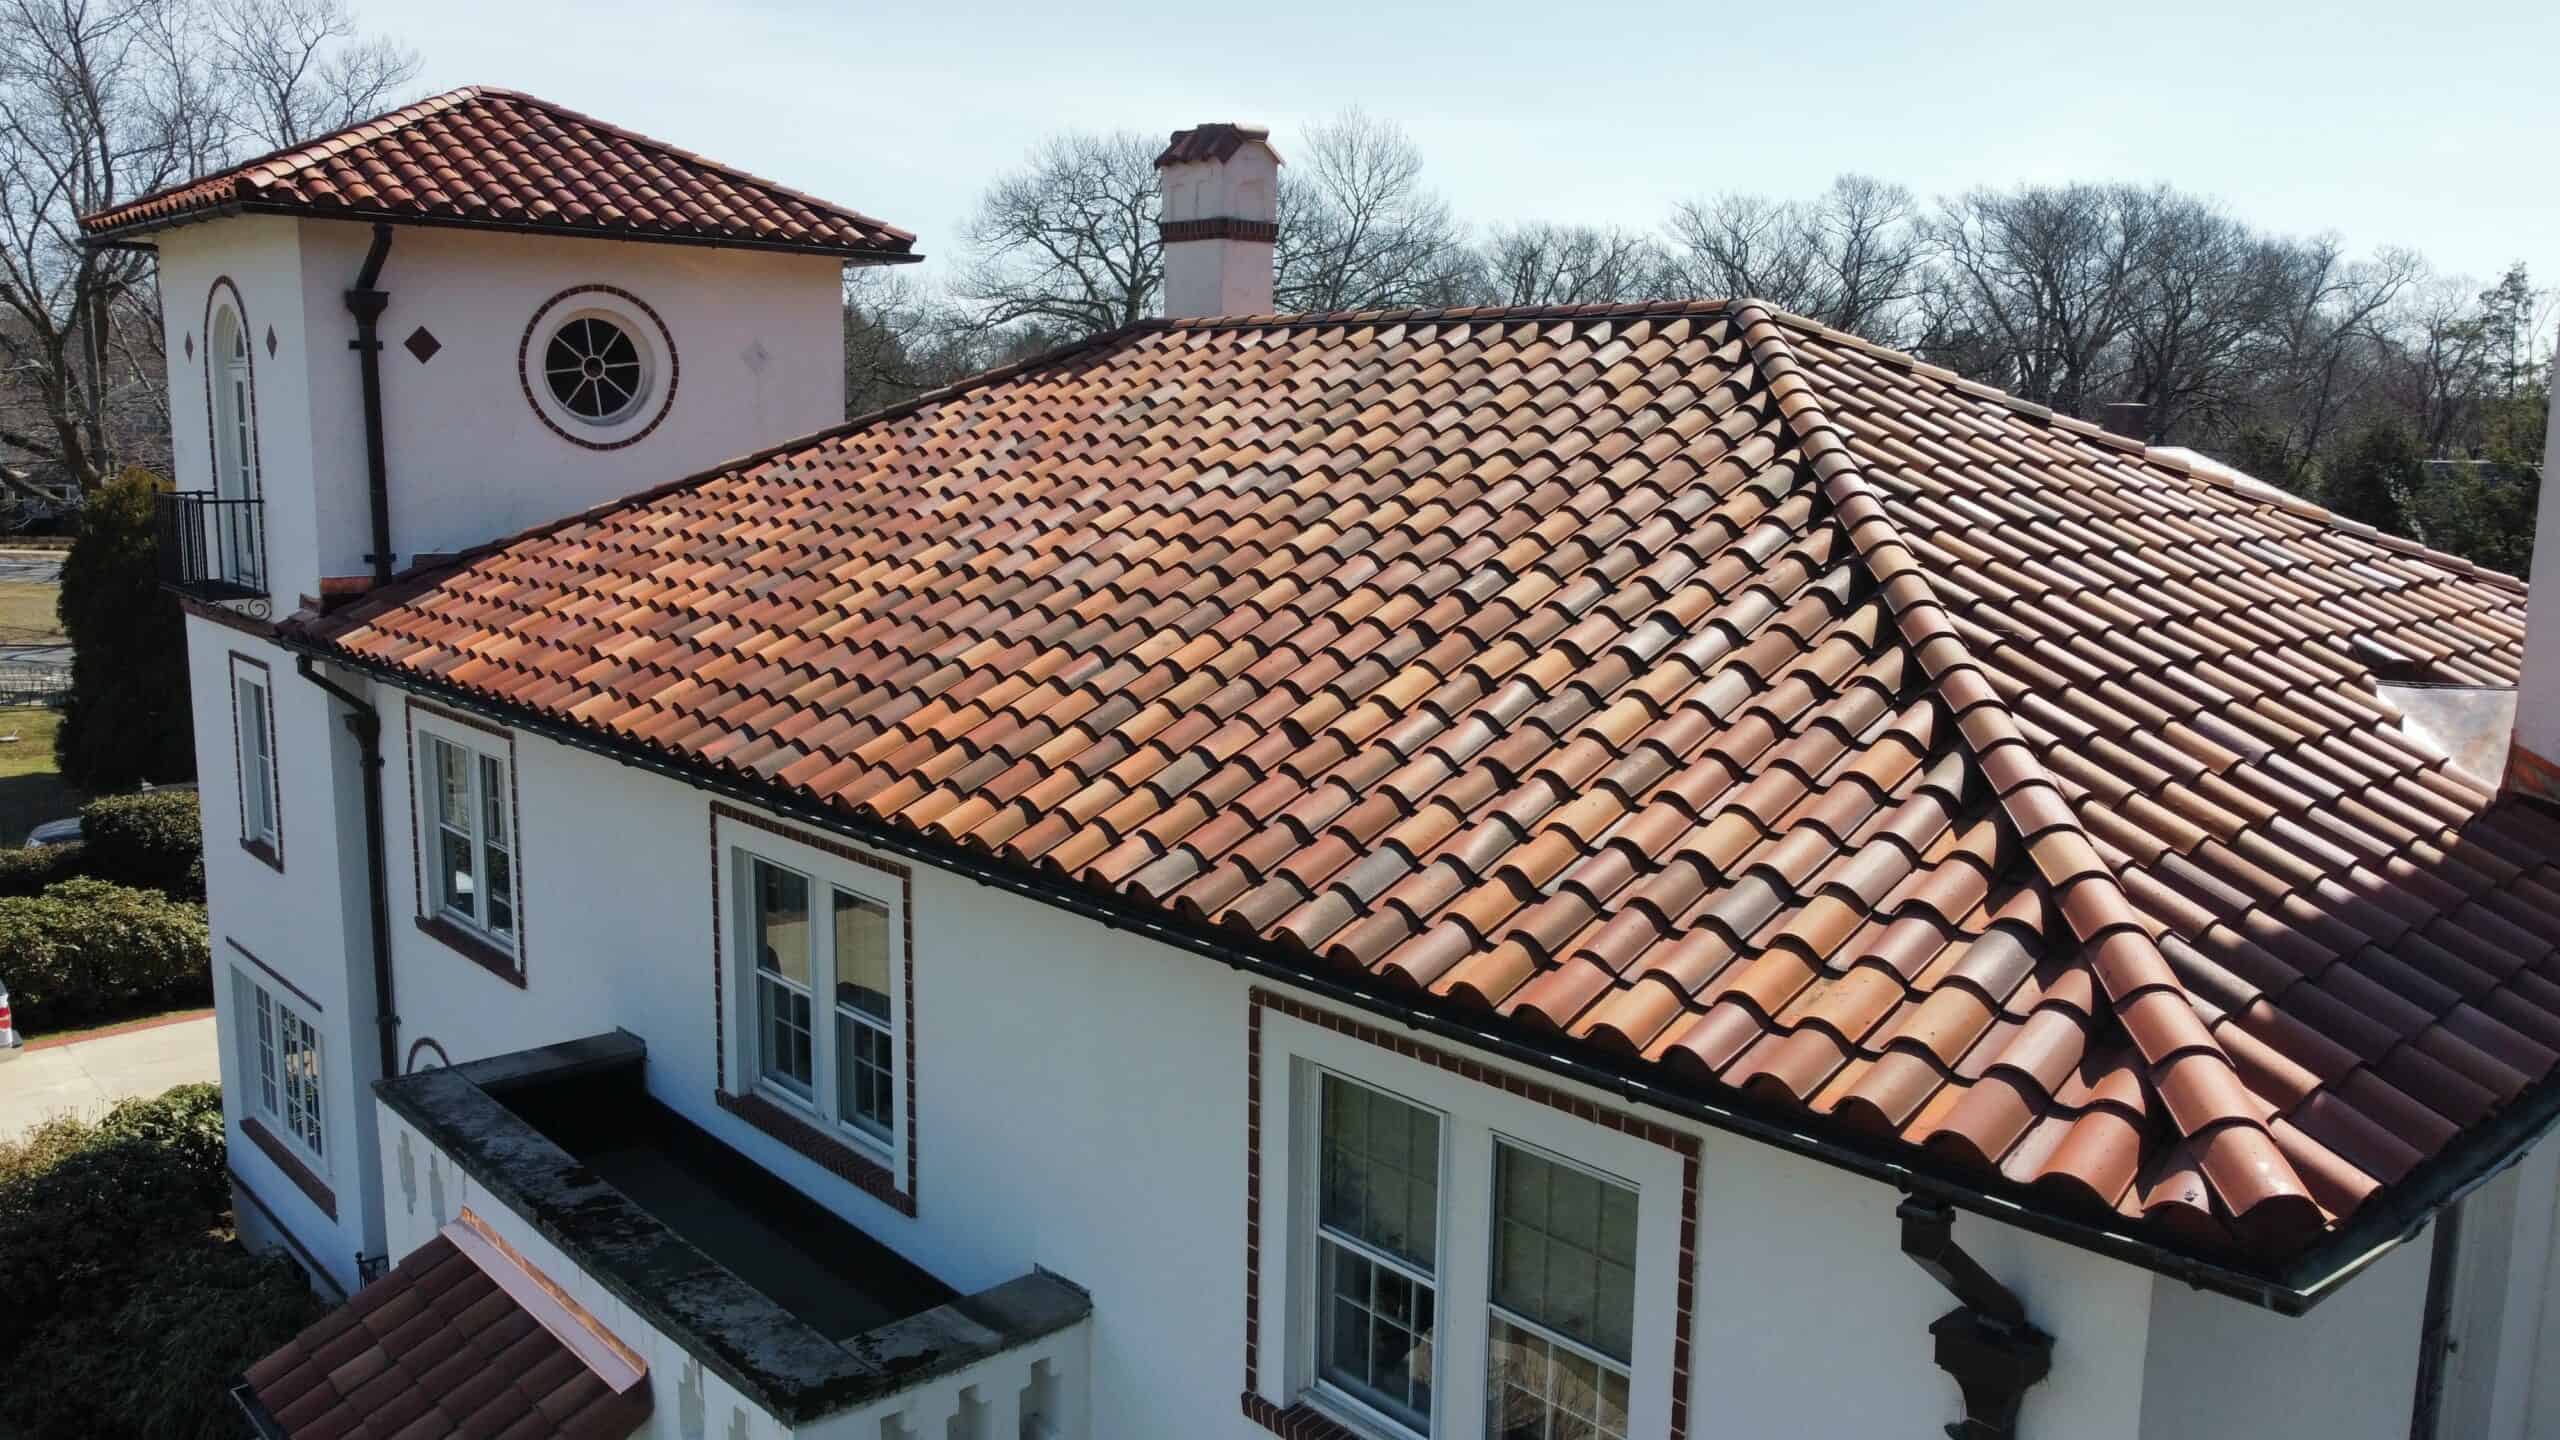 an aerial view of a house with a red tile roof.